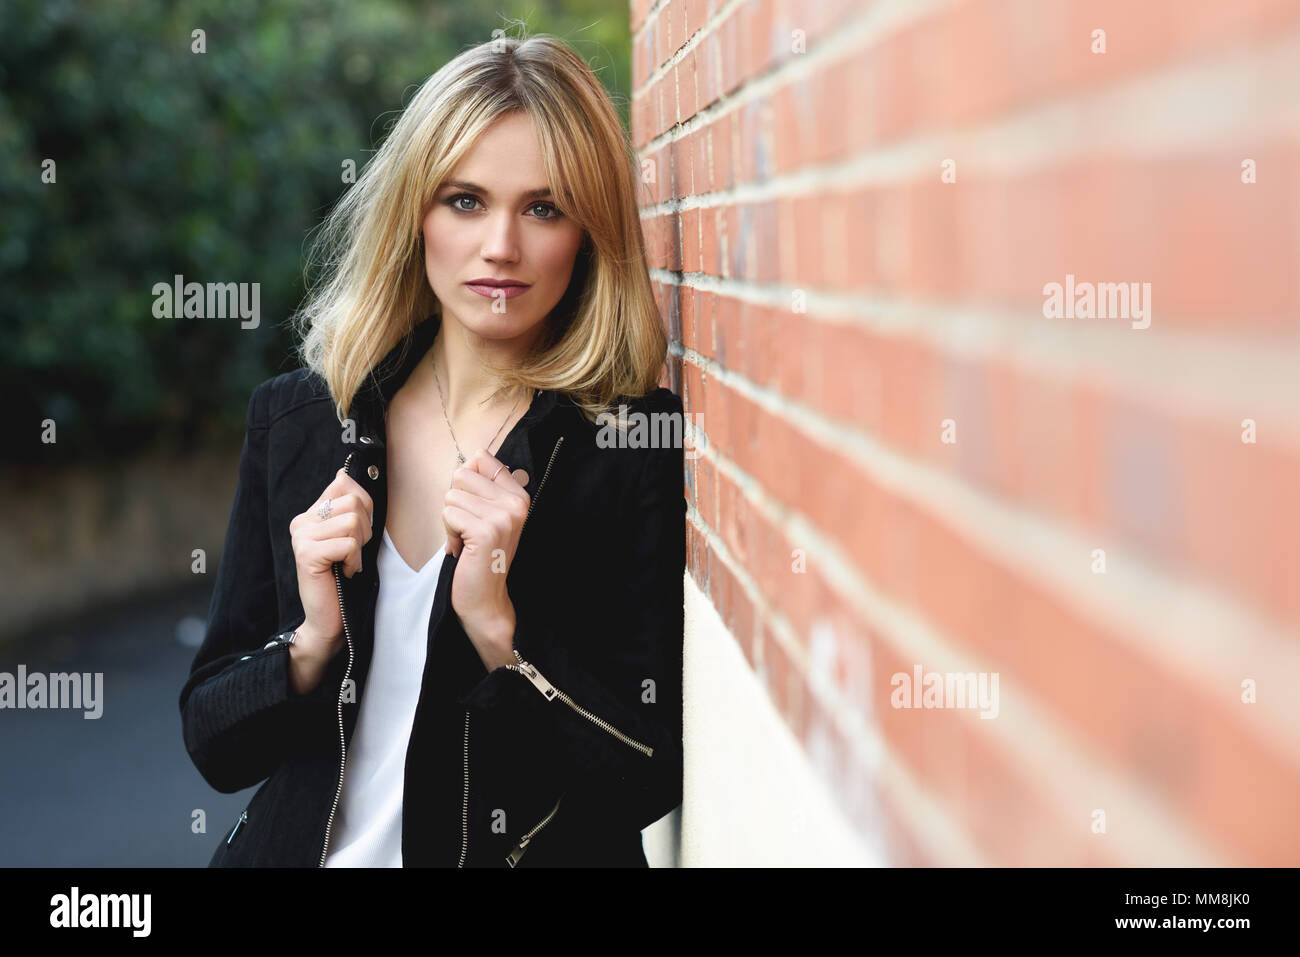 Attractive blonde woman in urban background. Young girl wearing black zipper jacket standing in the street. Pretty female with straight hair hairstyle Stock Photo